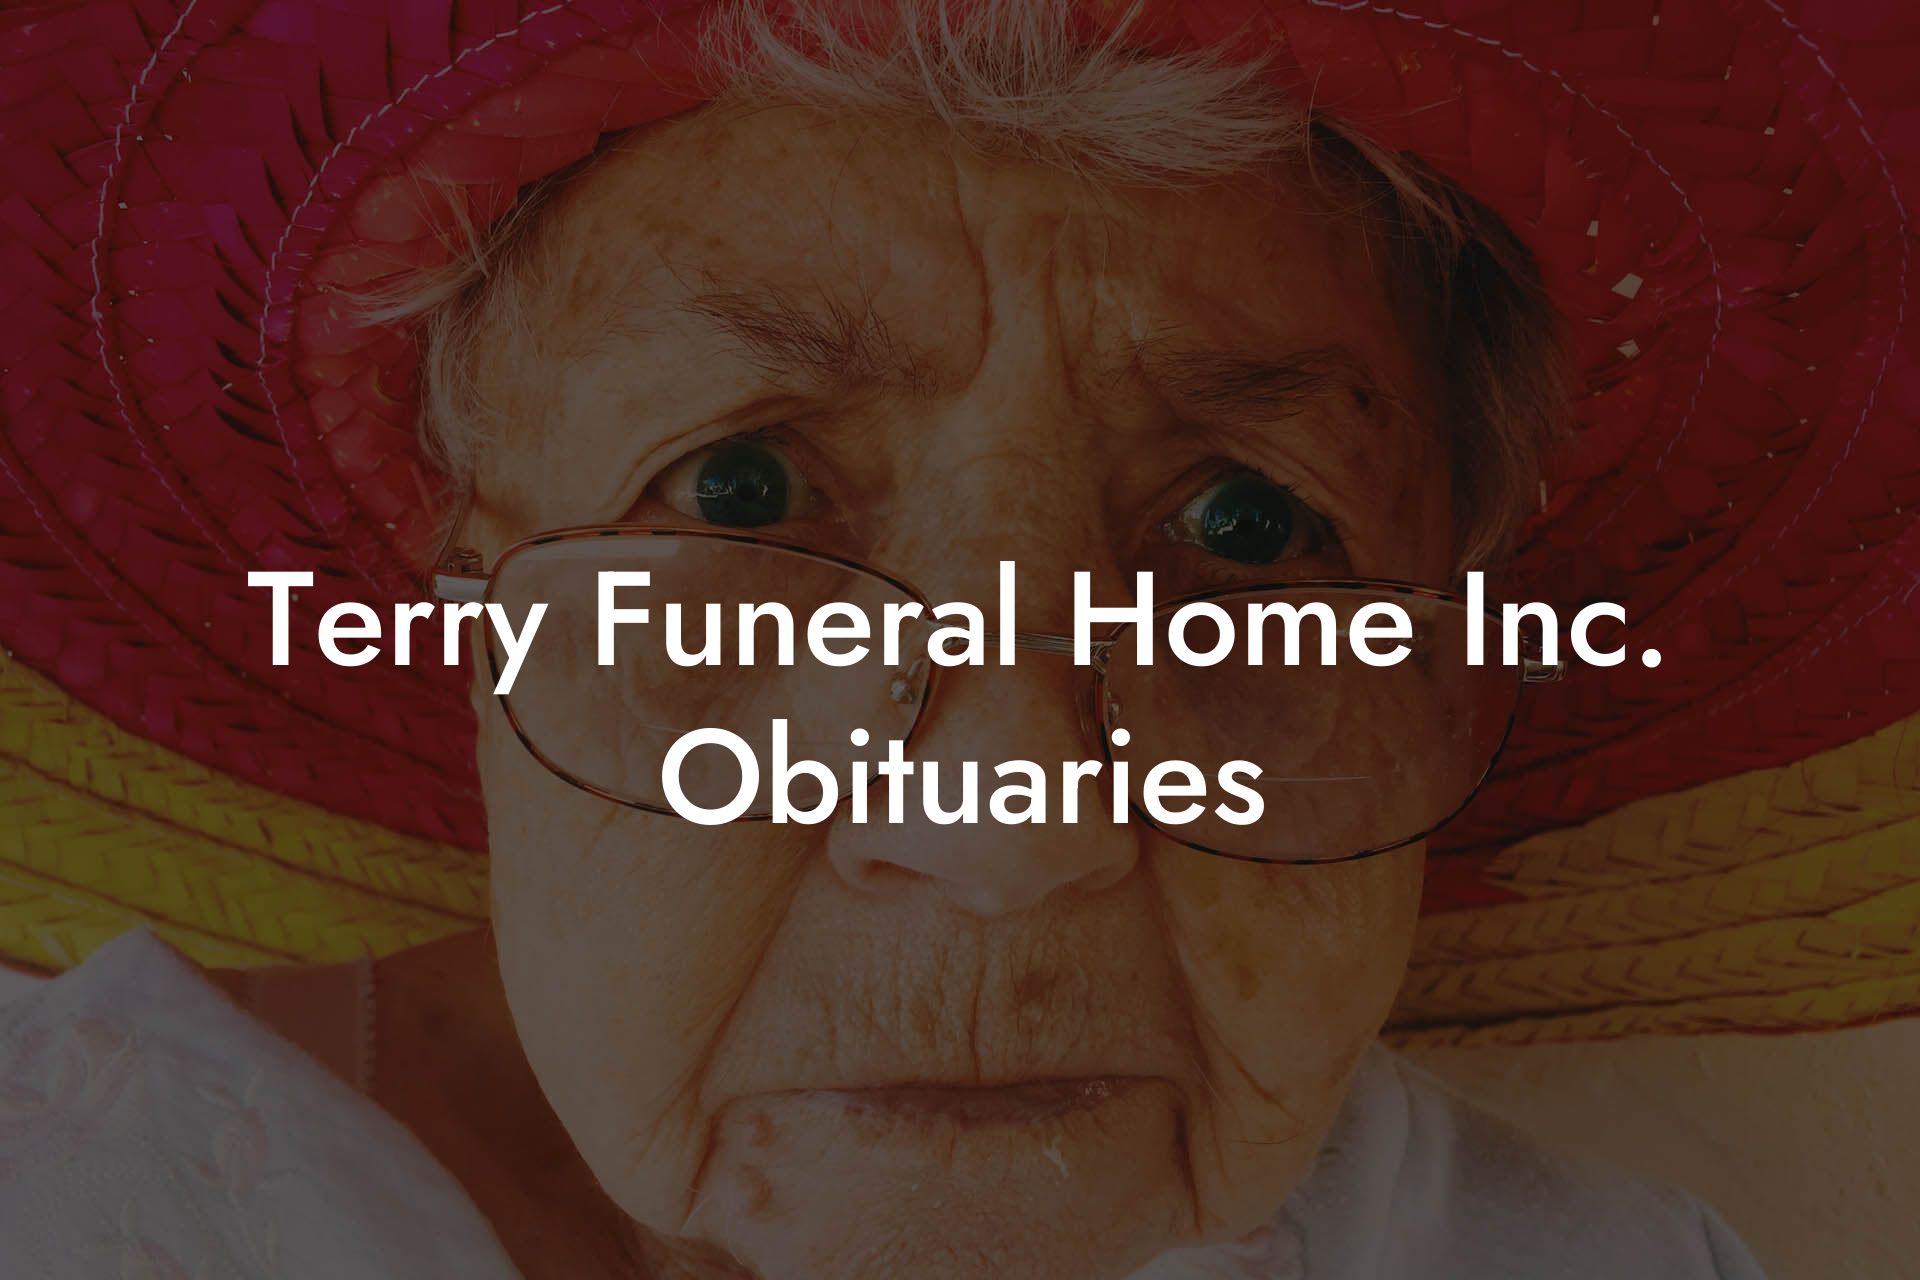 Terry Funeral Home Inc. Obituaries